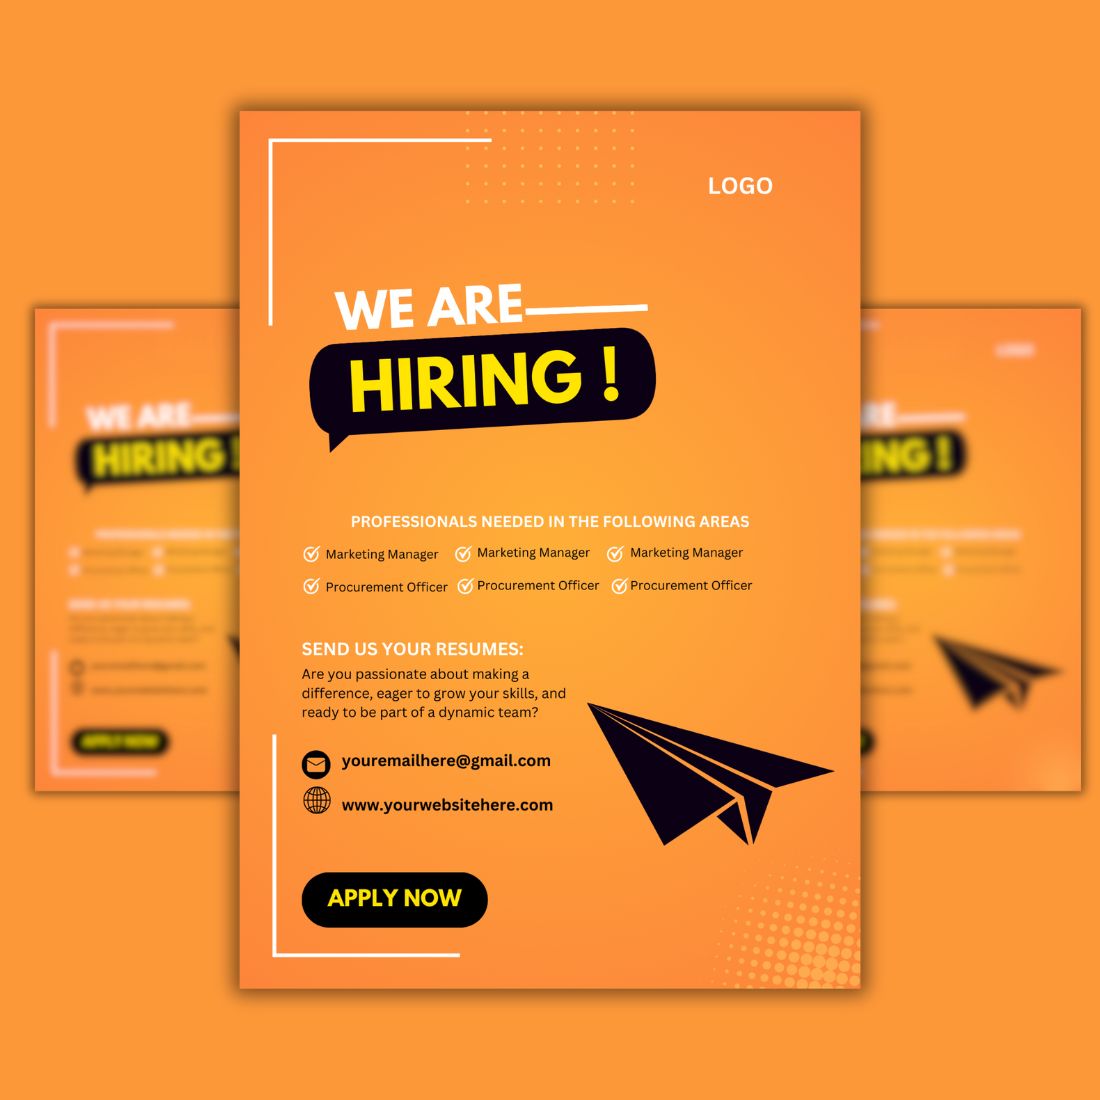 Hiring Canva Flyer Design Template cover image.